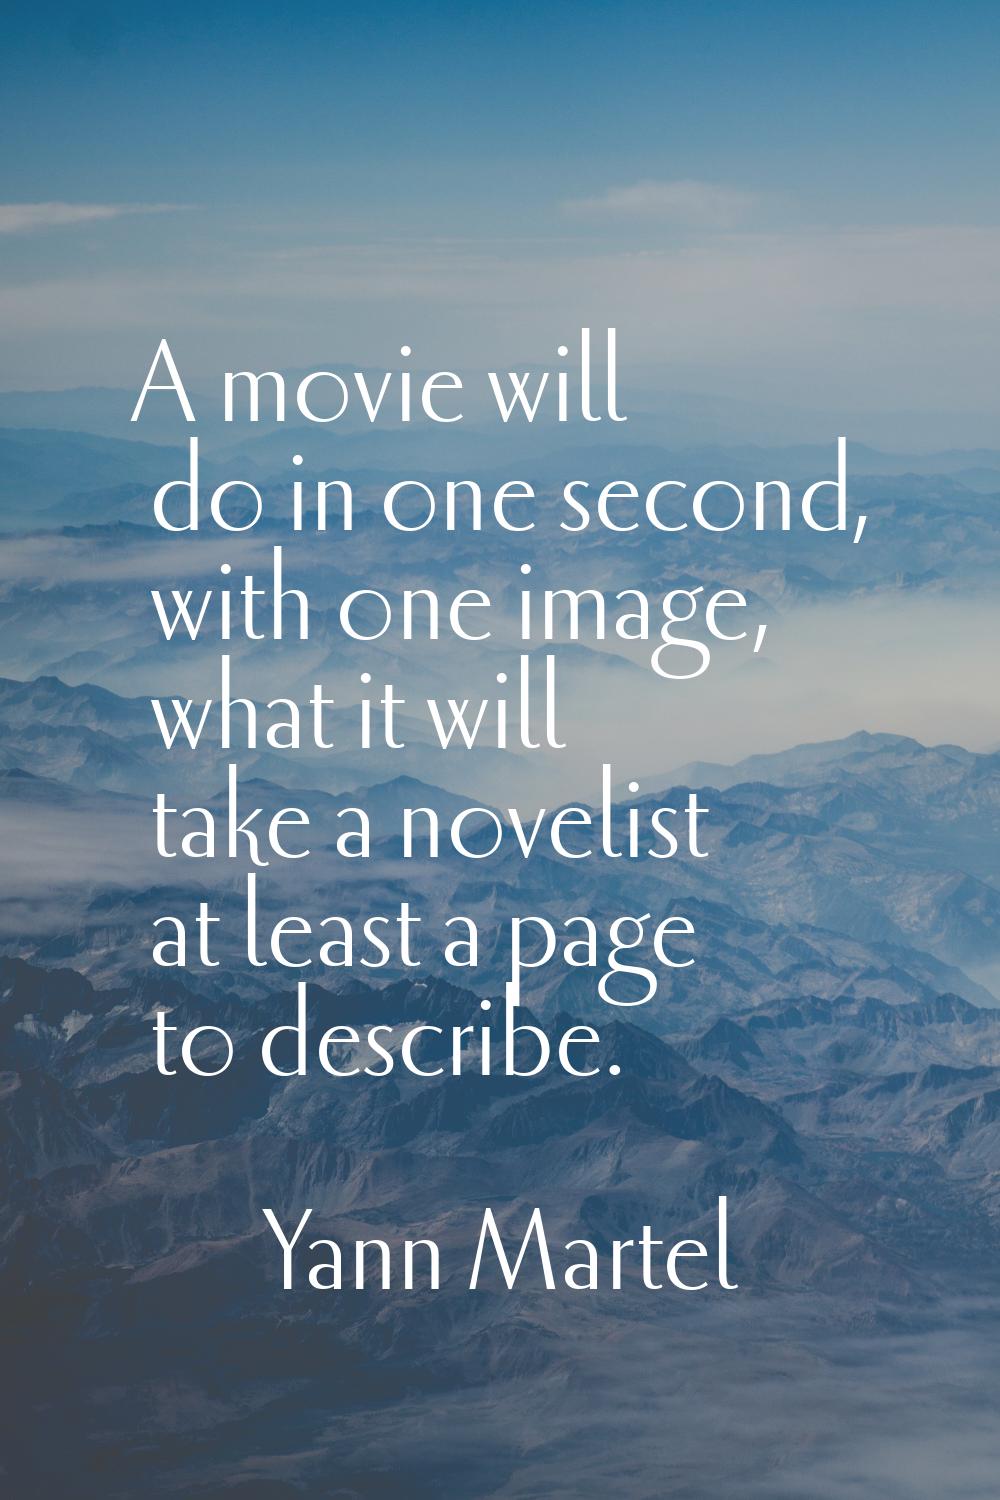 A movie will do in one second, with one image, what it will take a novelist at least a page to desc